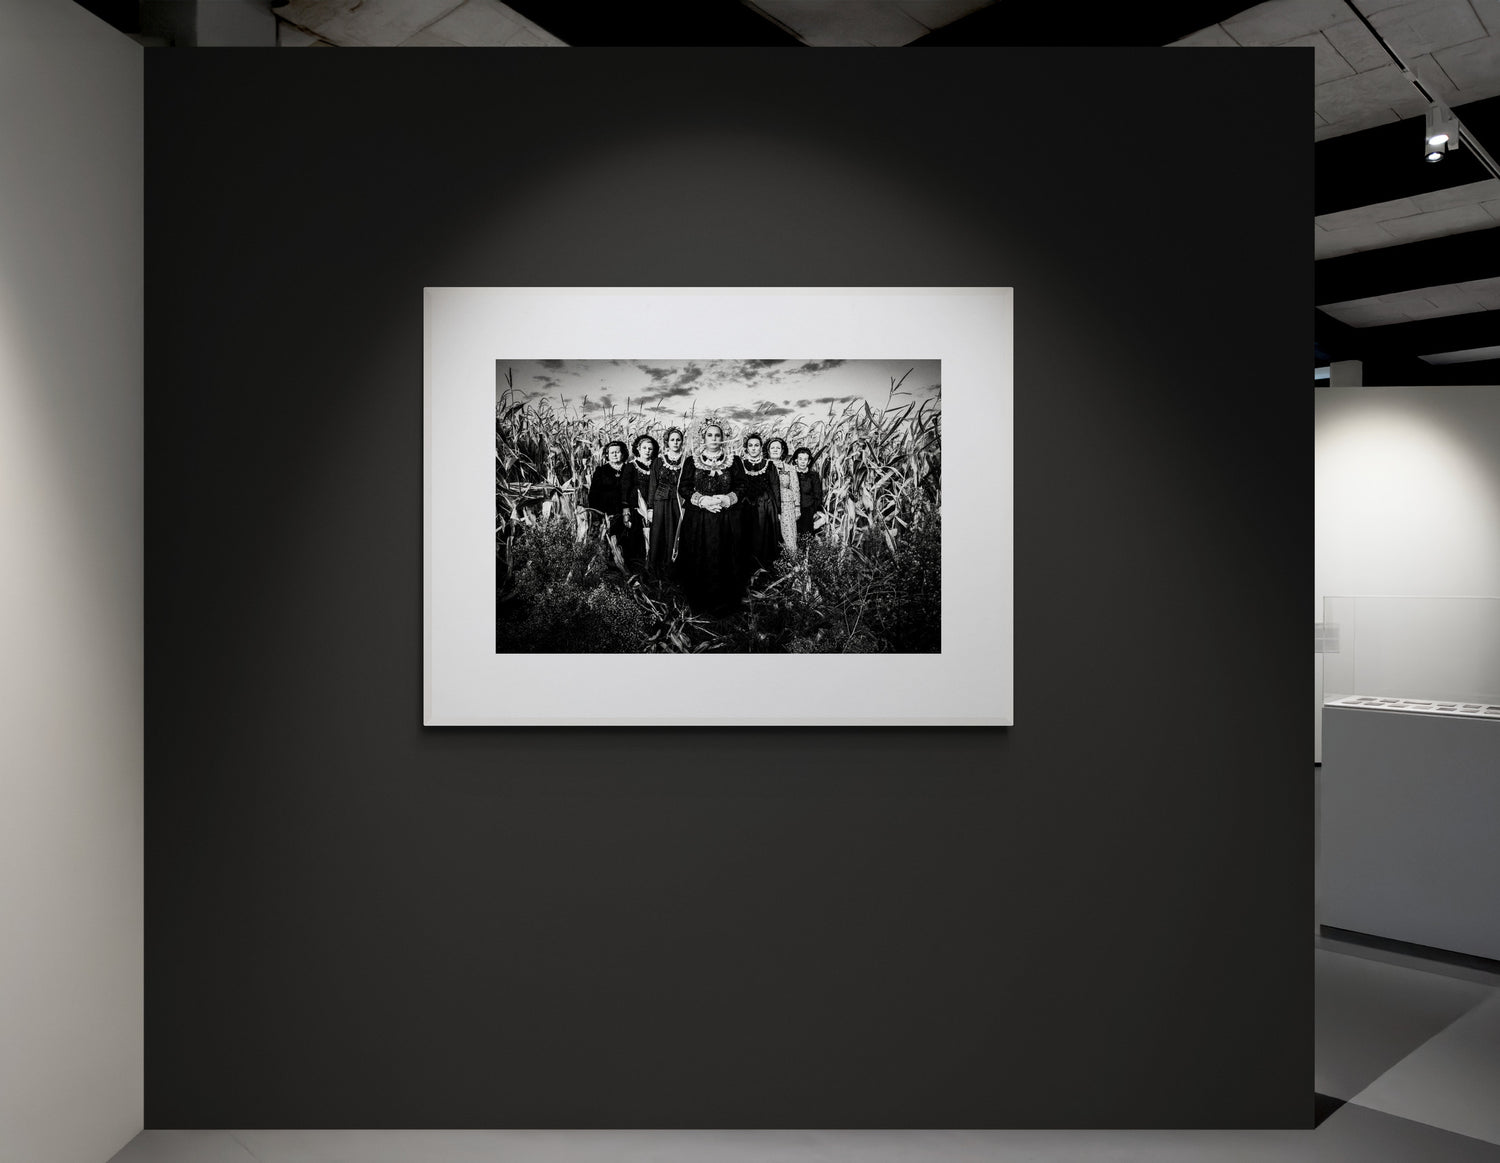 Black and White Photography Wall Art from Greece, by George Tatakis. Cornfield in Nea Vyssa, Evros, Thrace.